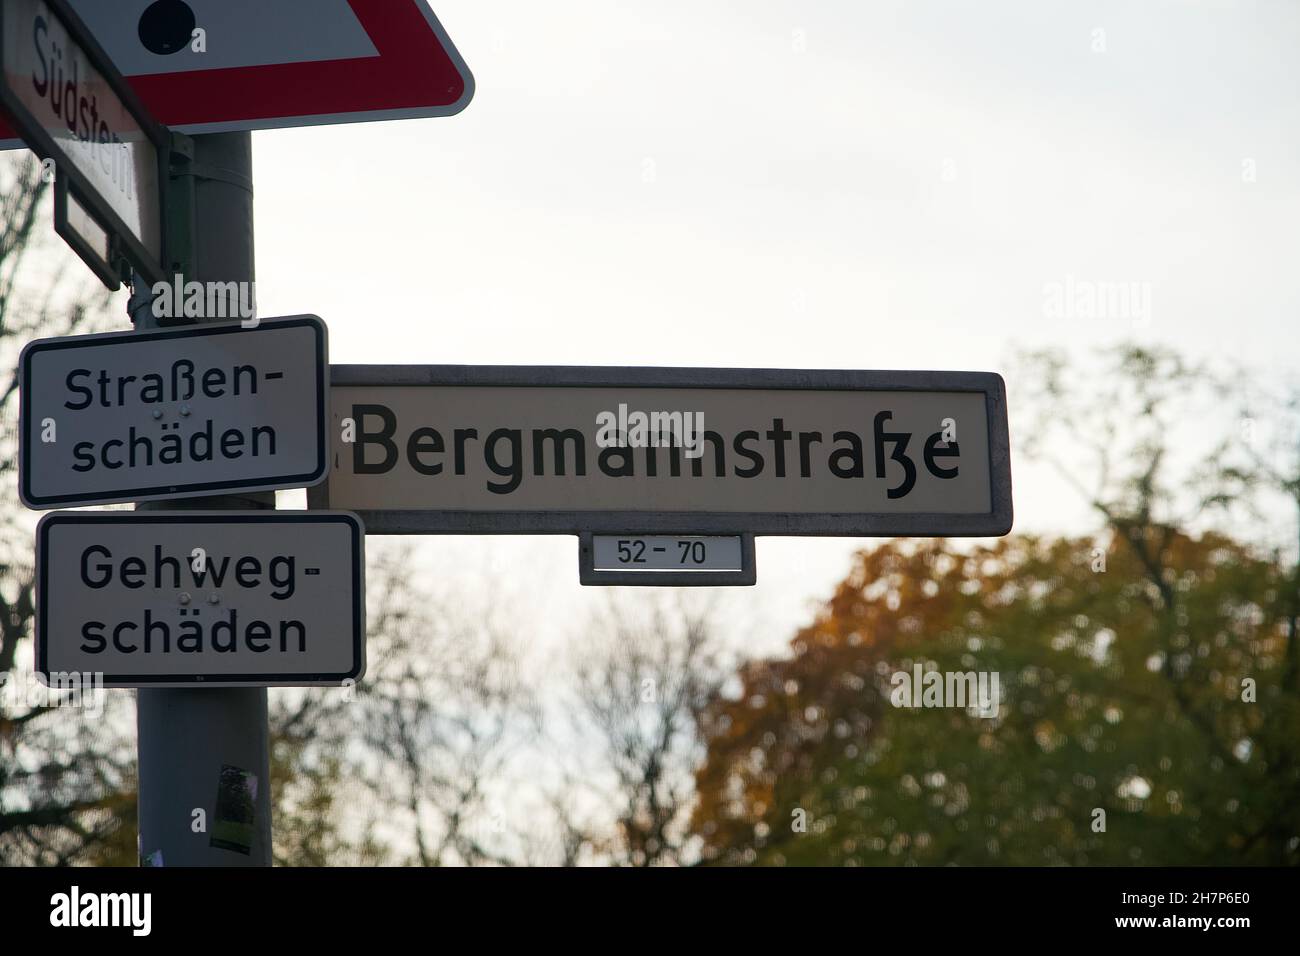 German Street Sign of Bergmannstrasse with additional Signs saying Roadway Damage and Sidewalk Damage Stock Photo